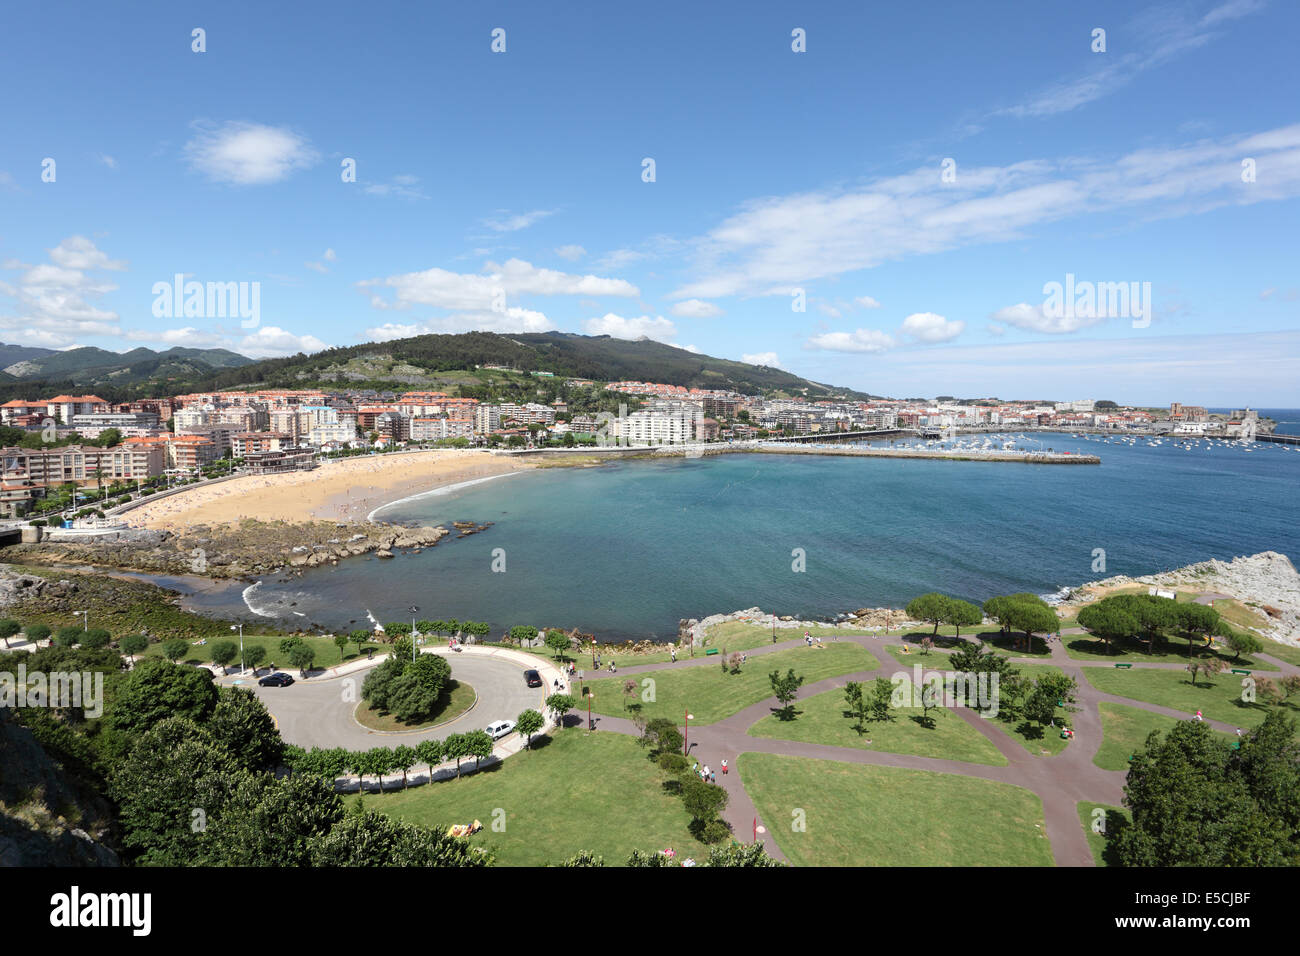 View over Castro Urdiales, Cantabria, Spain Stock Photo